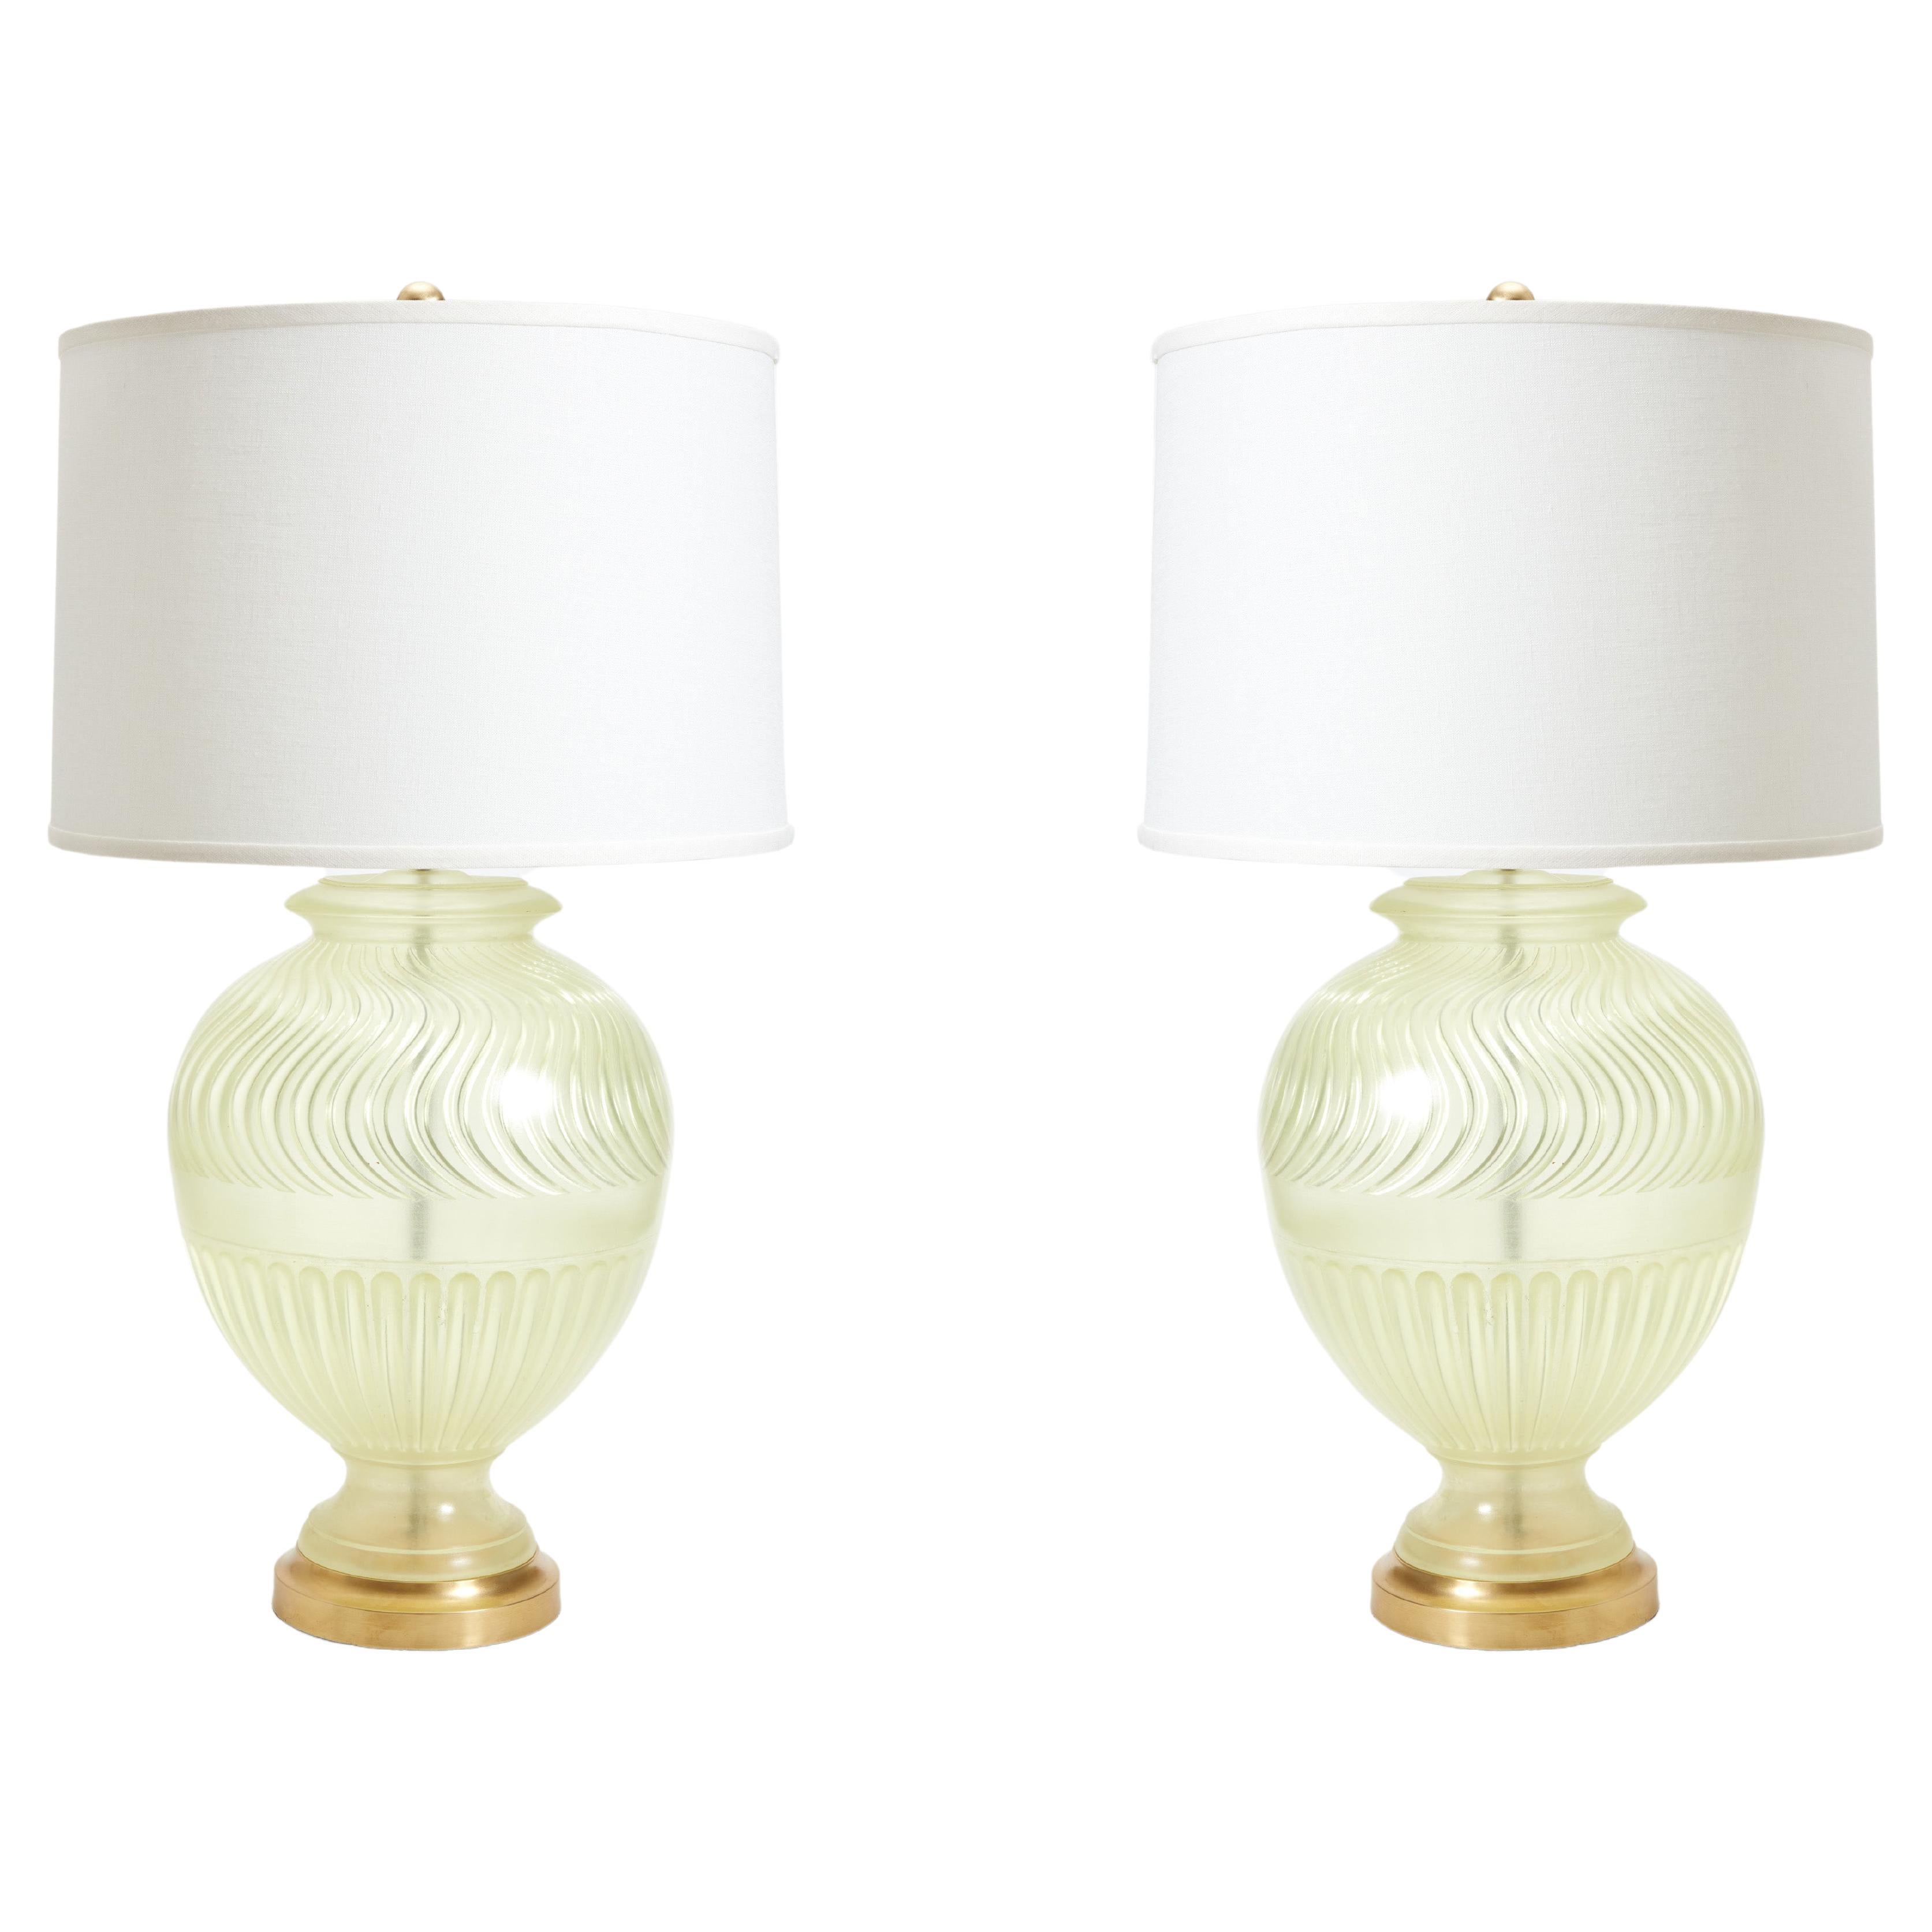 Pair of Assyrian Vase Lamps in Pale Citrine by David Duncan Studio For Sale